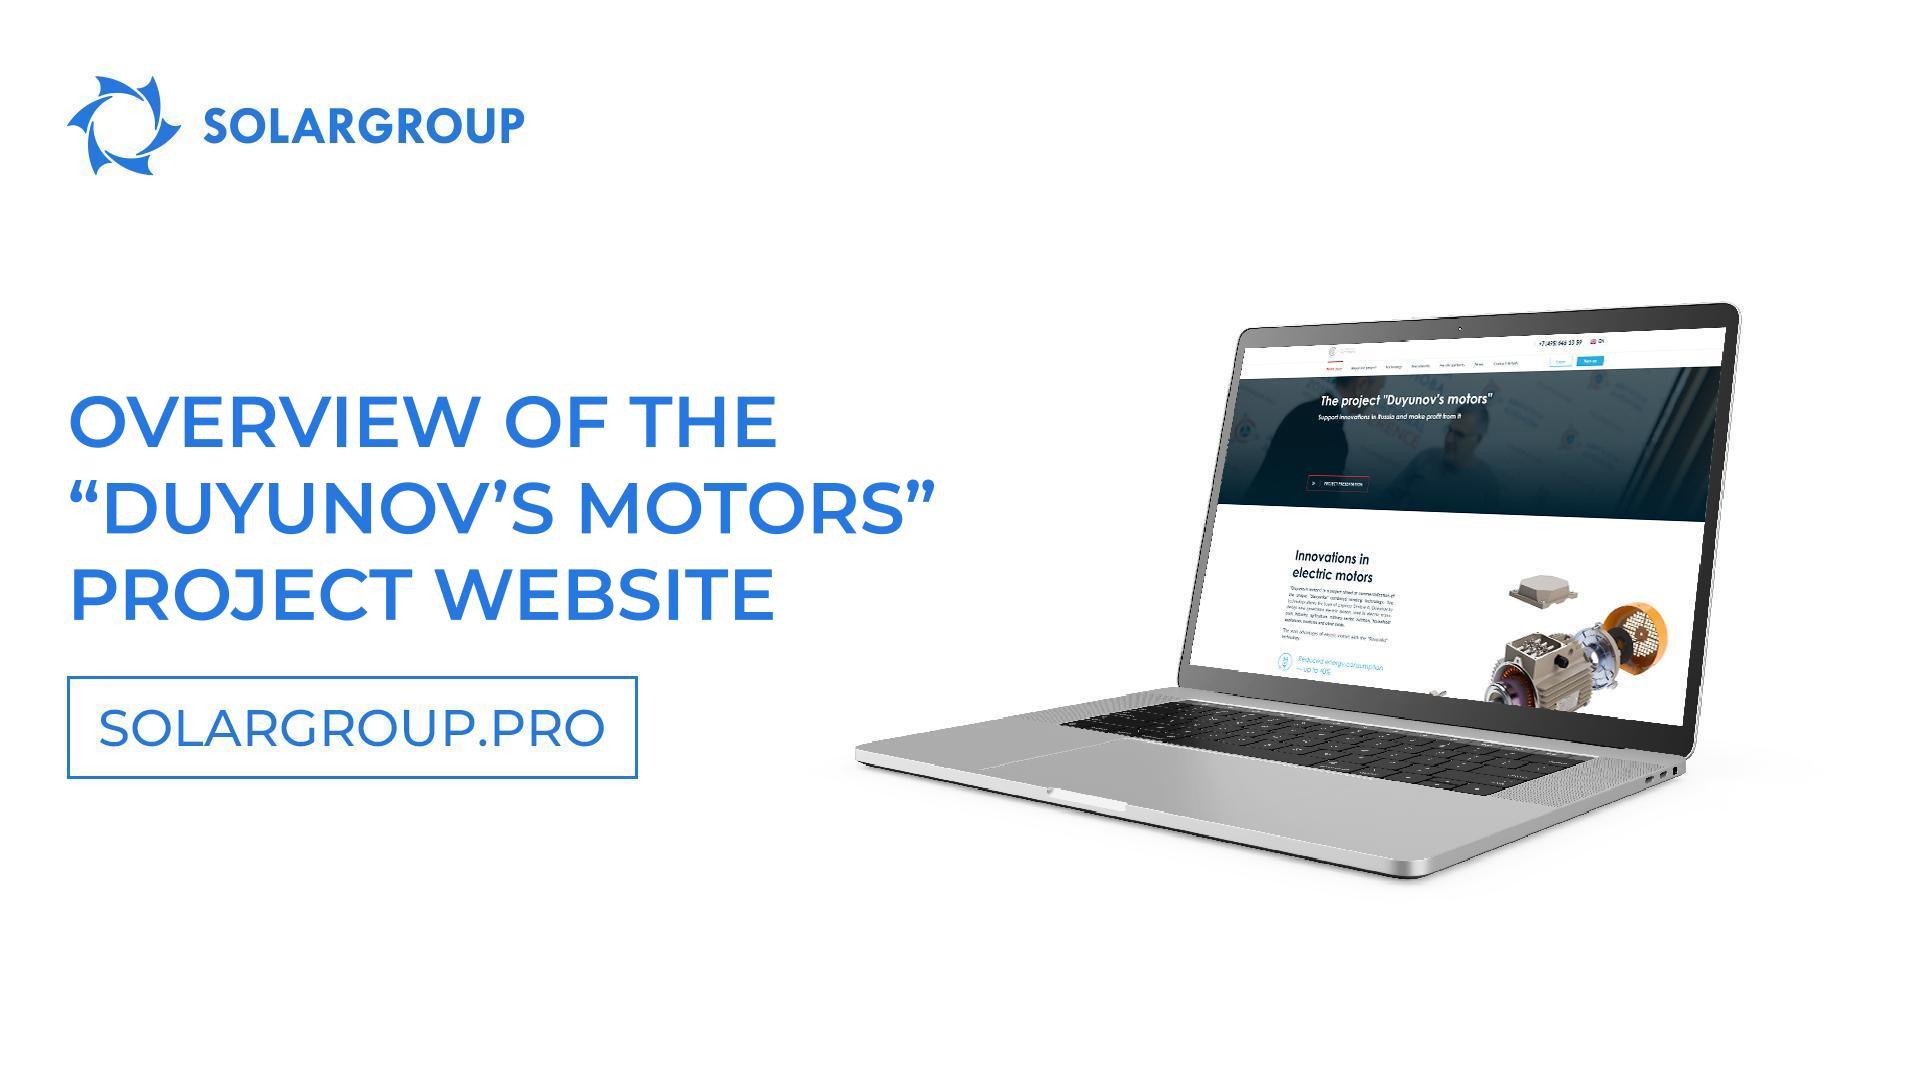 About the benefits of the "Duyunov's motors" project website